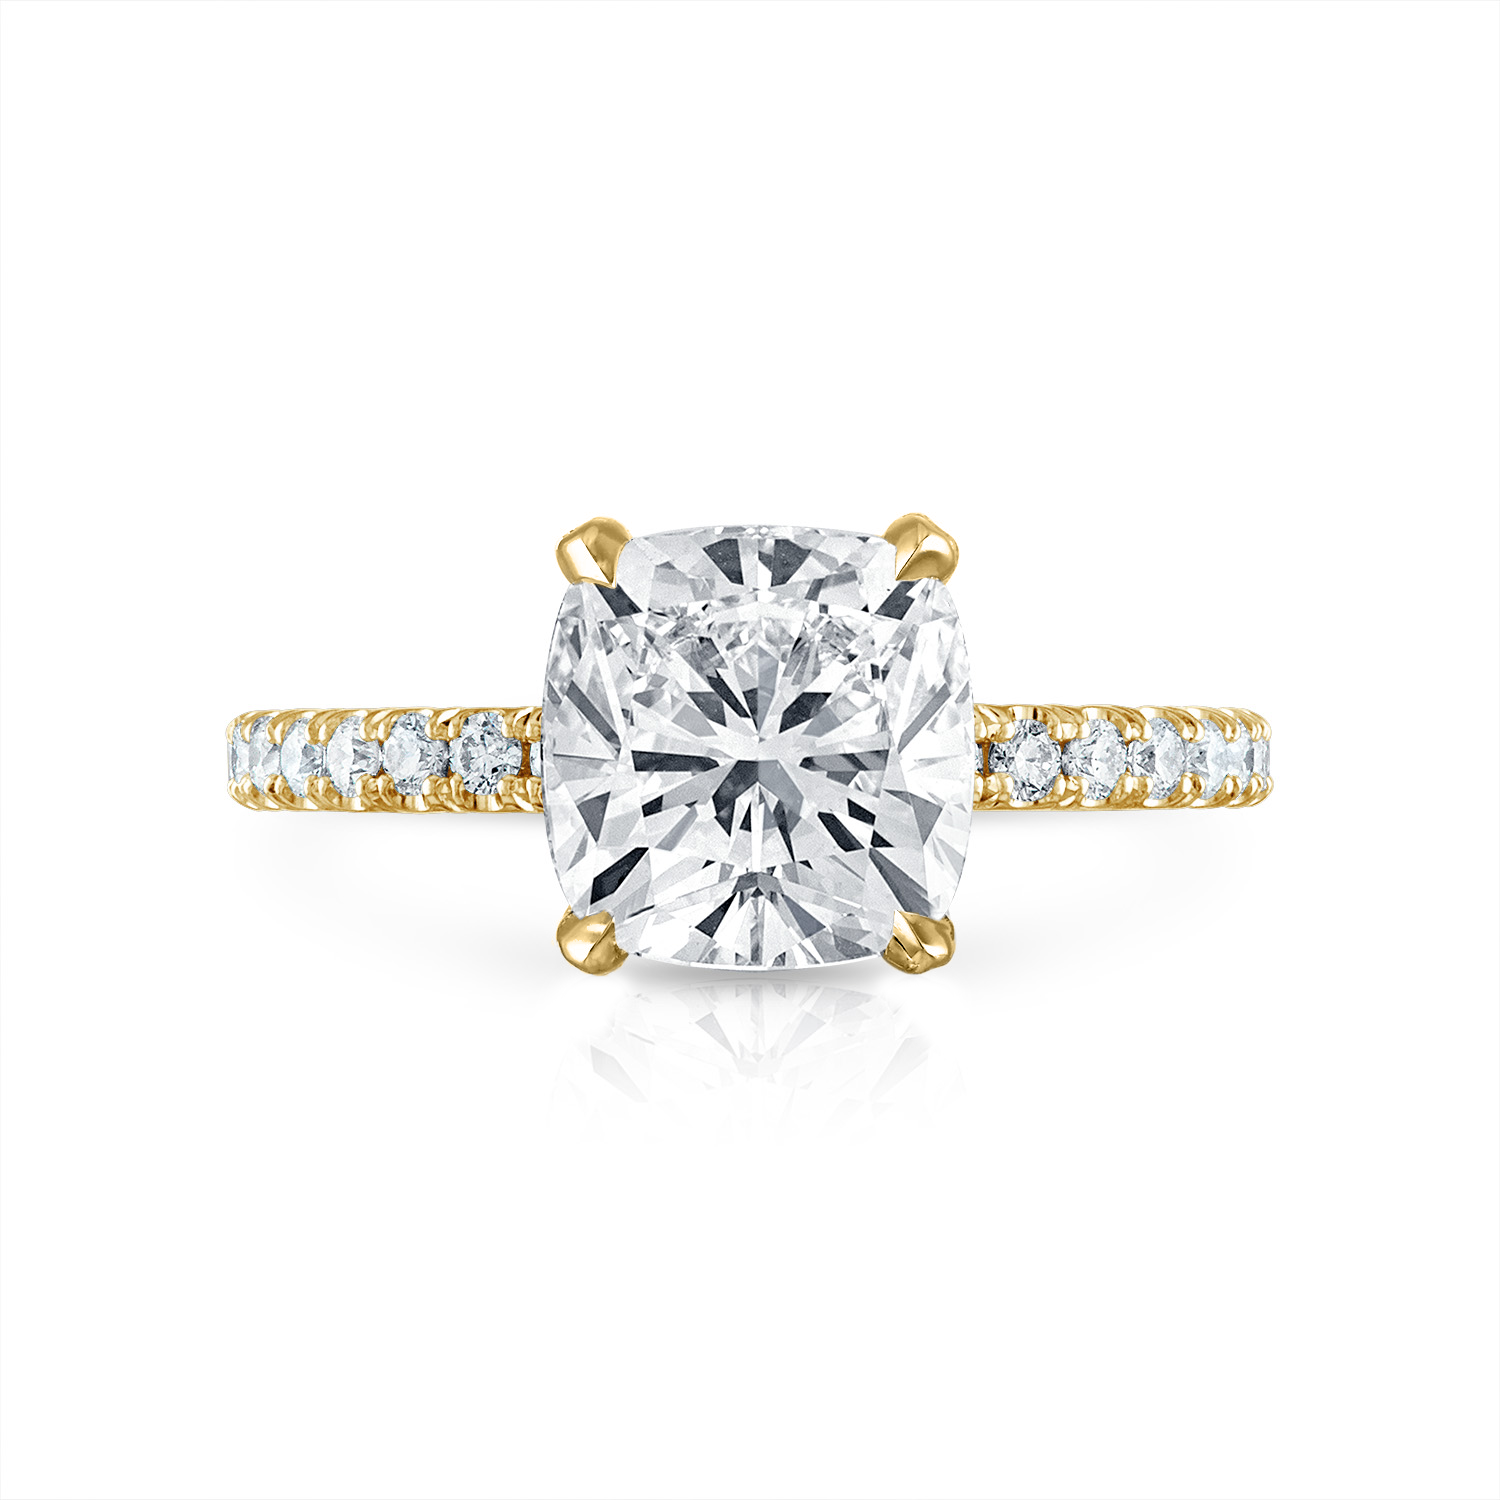 Cushion Pave Engagement Ring in Yellow Gold